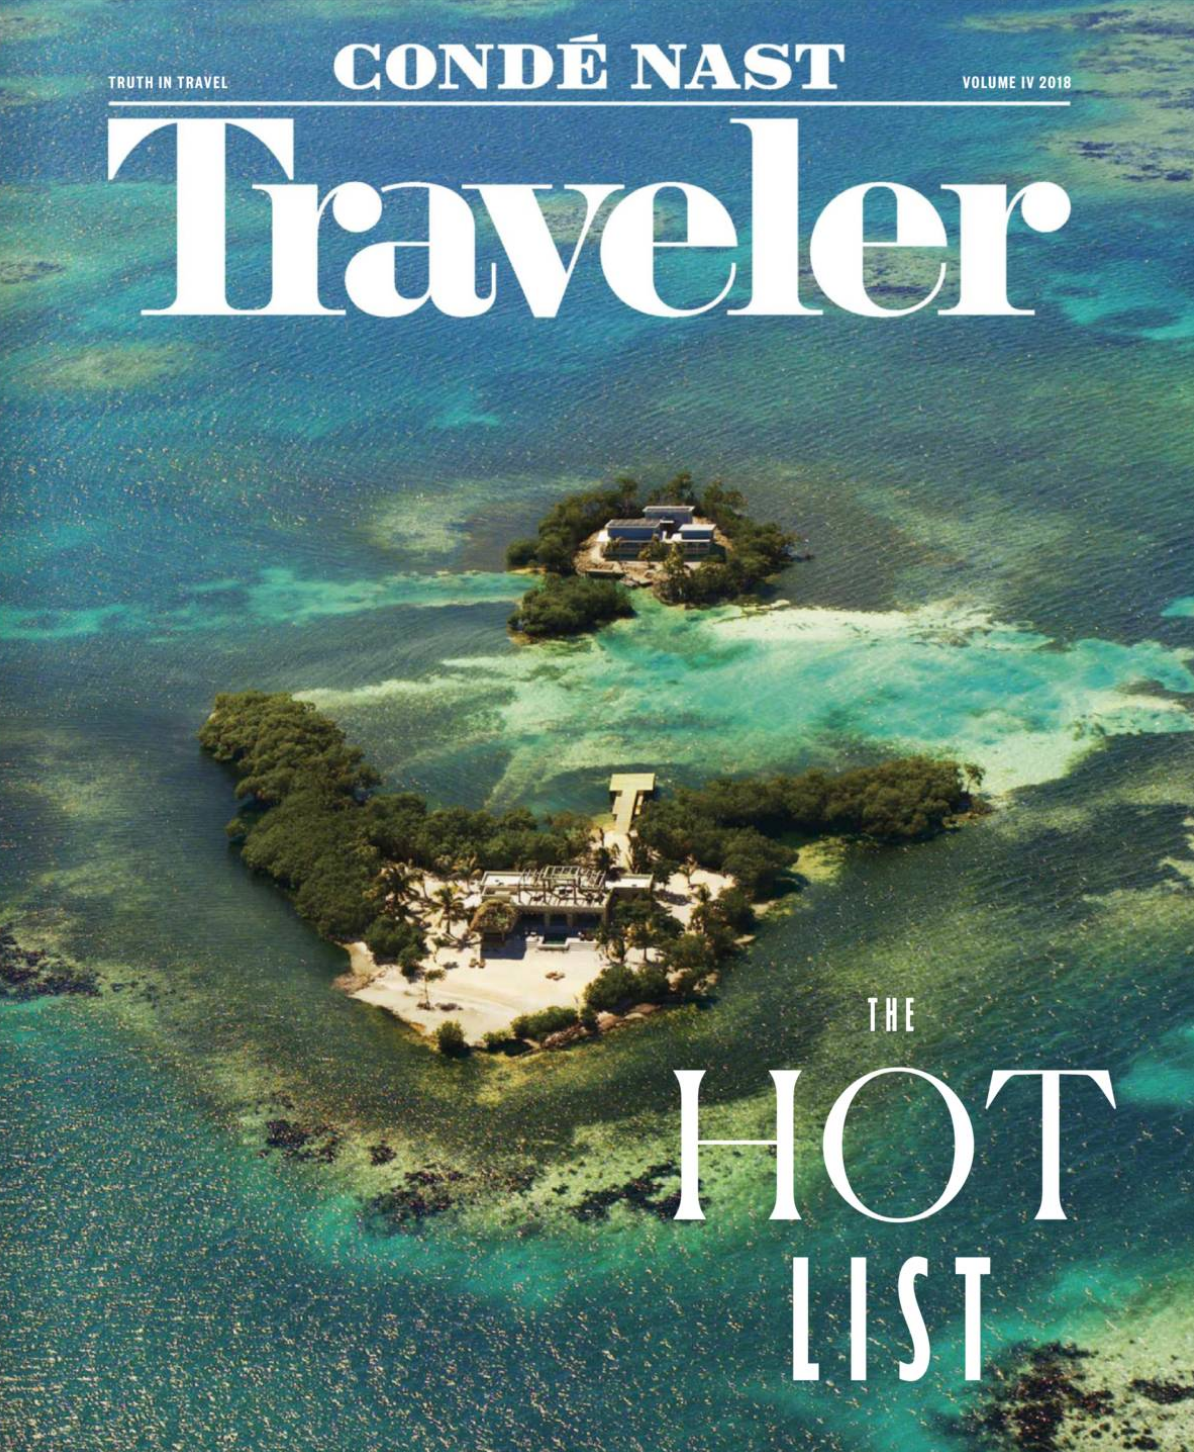 Condé Nast Traveler: Why Your Next Island Getaway Should Be to India’s Andamans